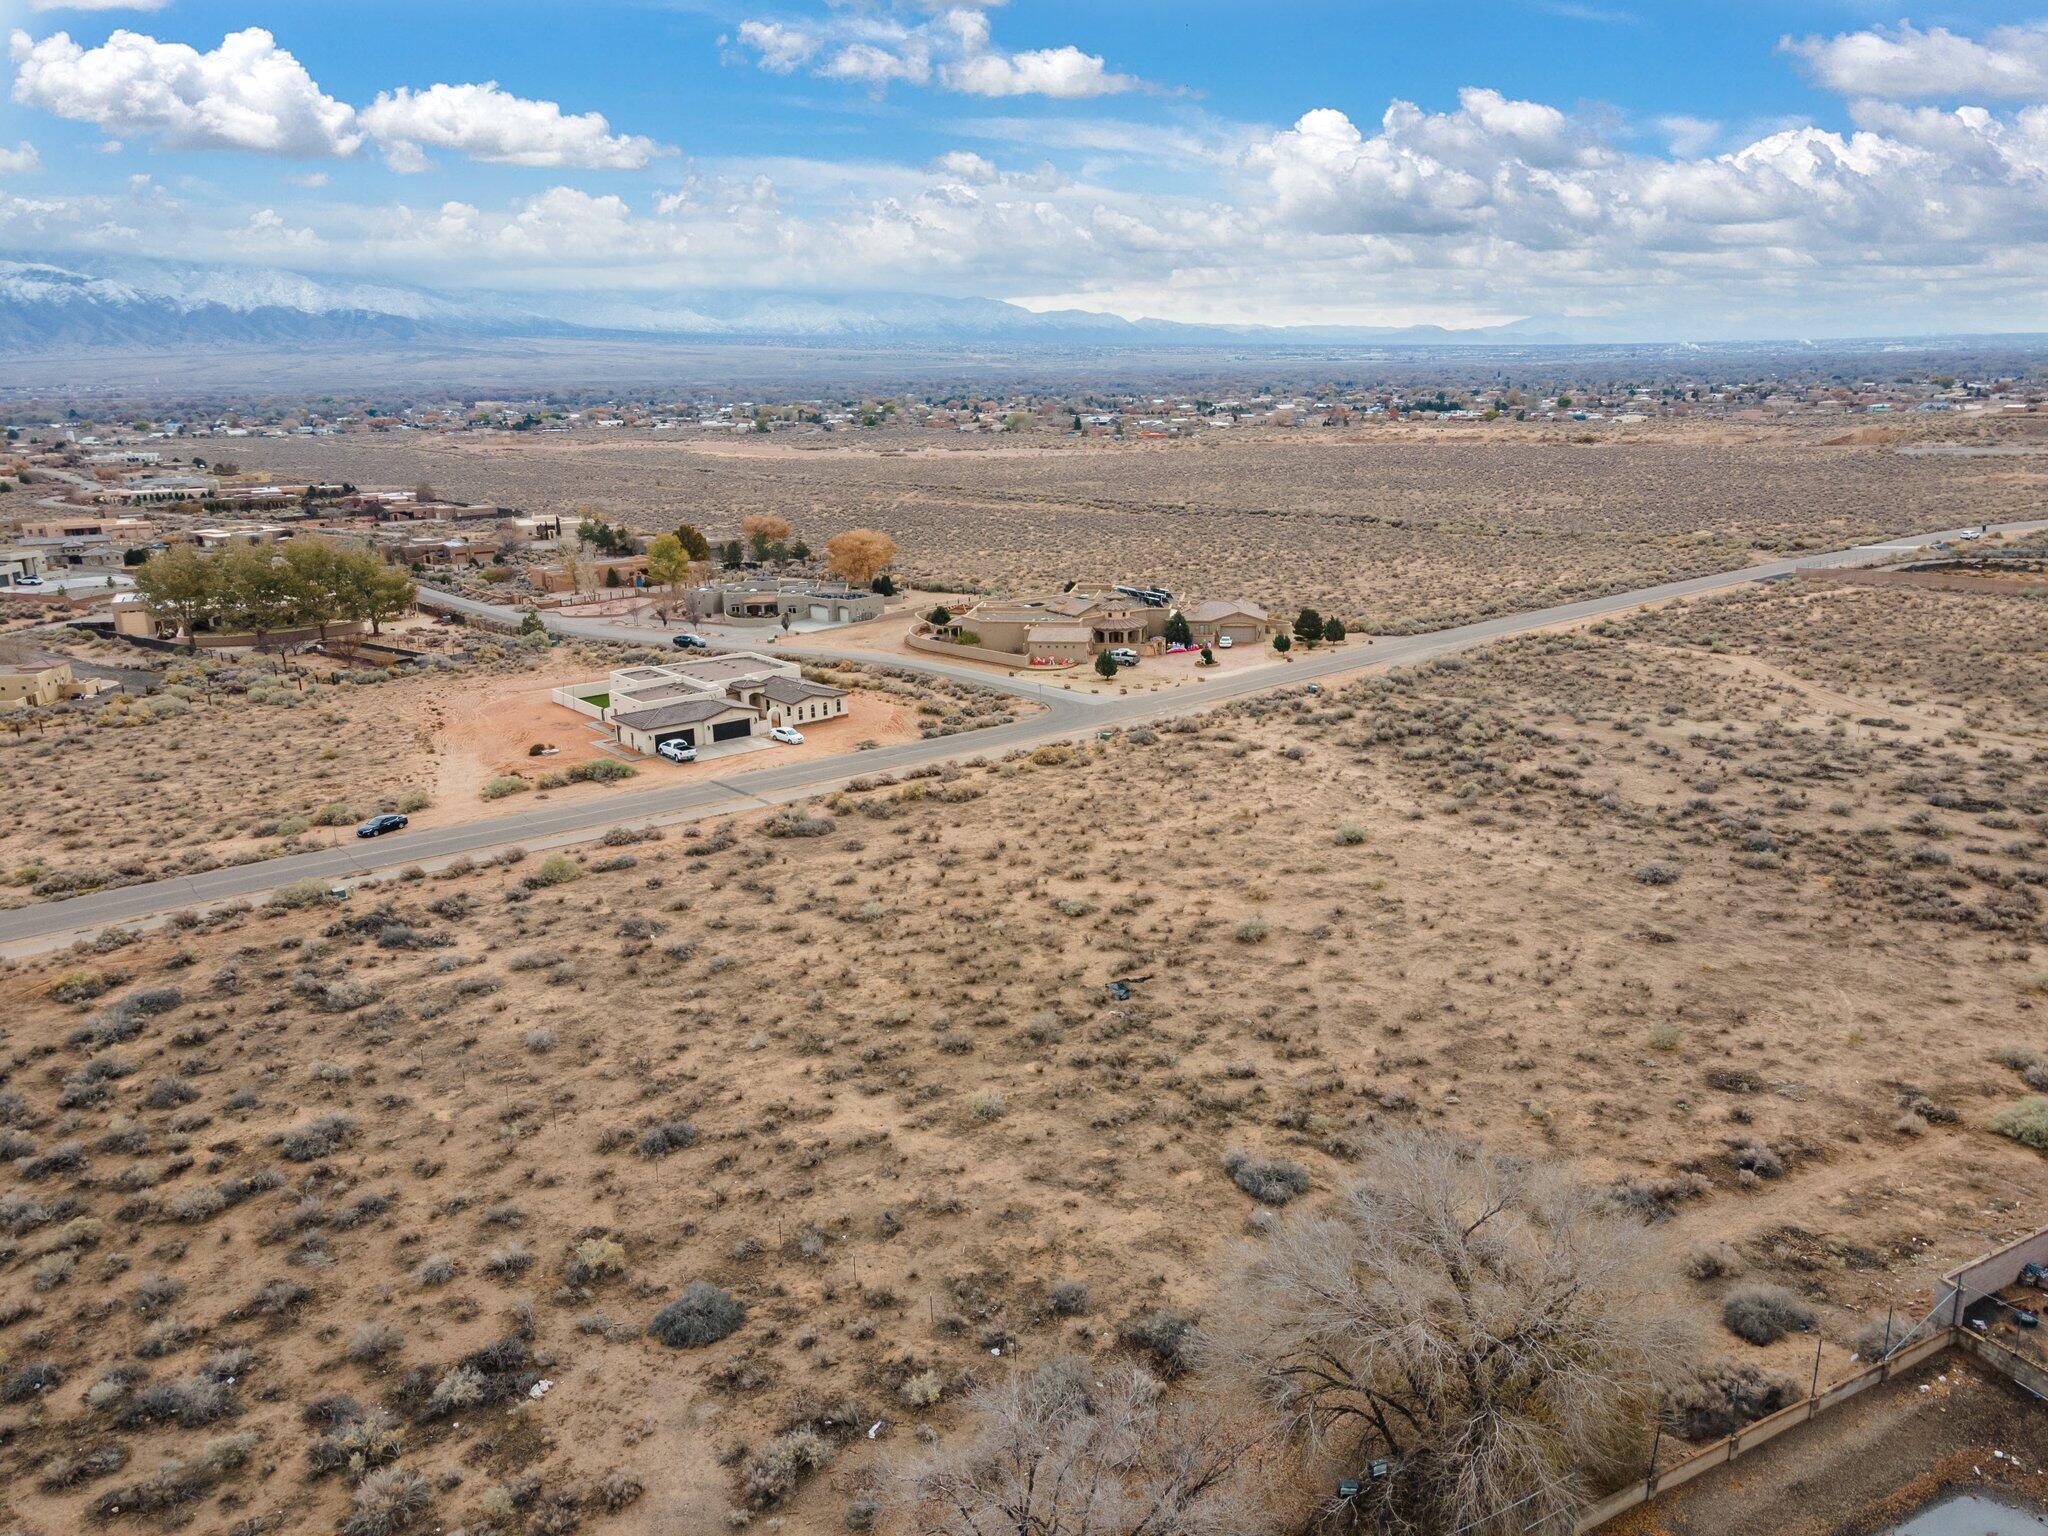 Lot 3 Don Julio Road, Corrales, New Mexico 87048, ,Land,For Sale,Lot 3 Don Julio Road,1053858